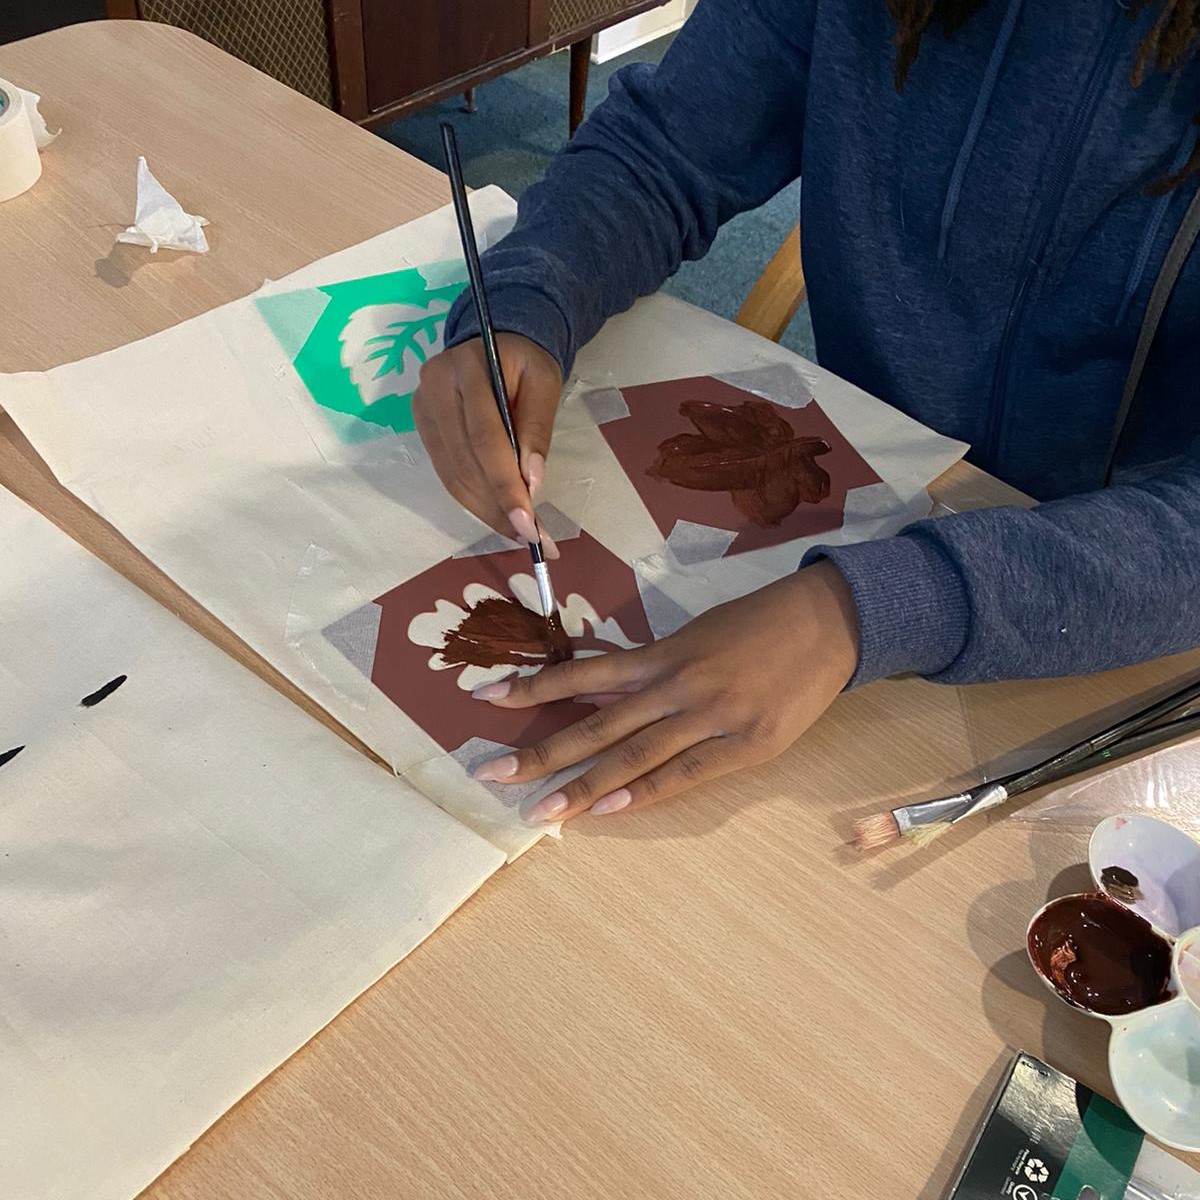 Stencilling workshop during our Rafiki Project in Autumn 2020. Arts & culture activities play a valuable role in the mental wellbeing of our clients. We would love to hear about some of the activities you have tried and enjoyed with your clients- let us know in the comments.